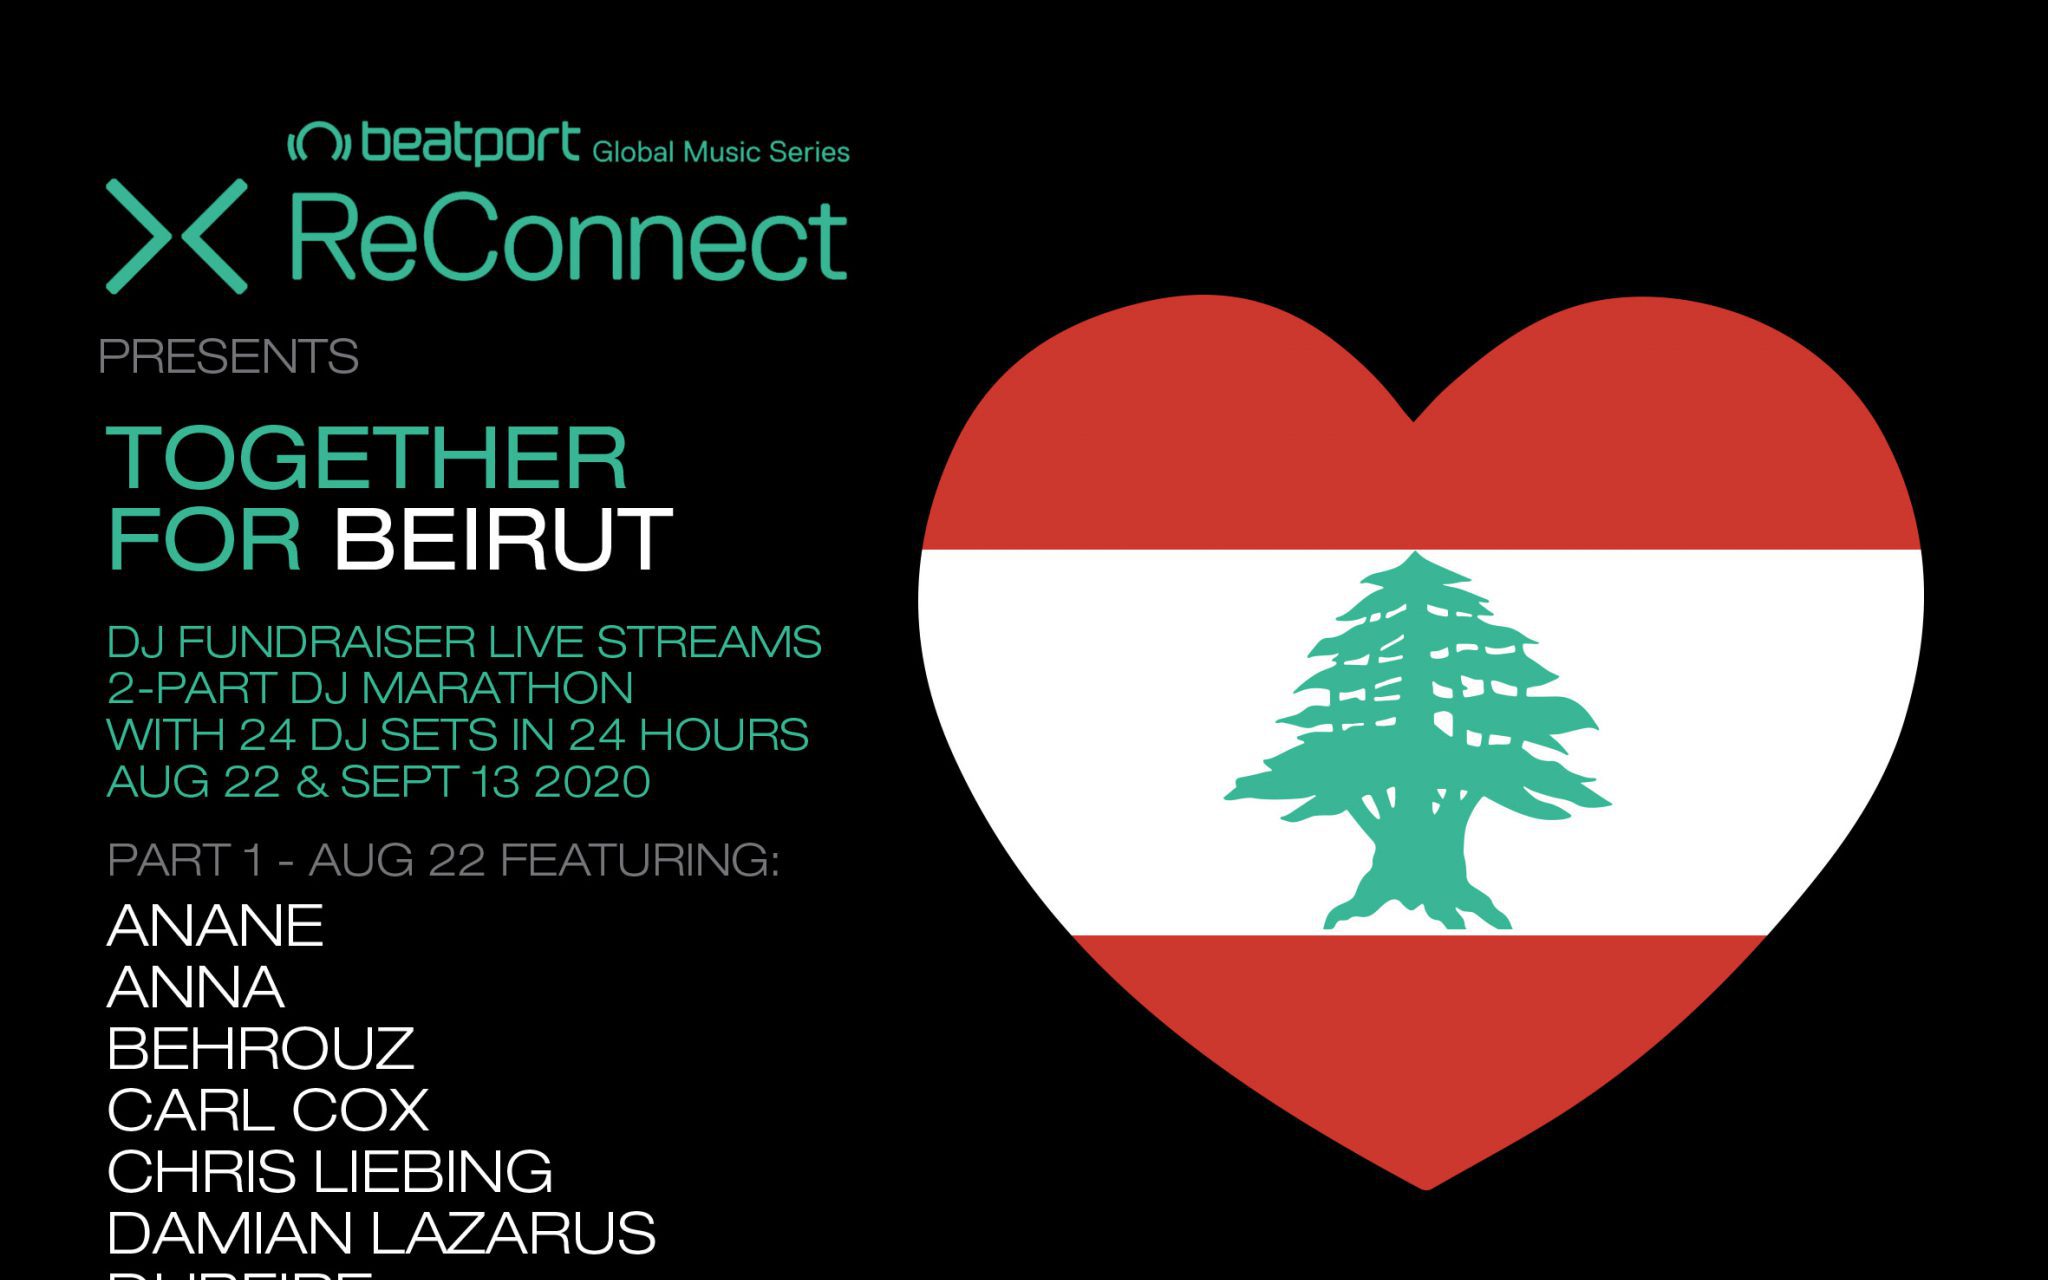 Beatport ReConnect Presents Together For Beirut